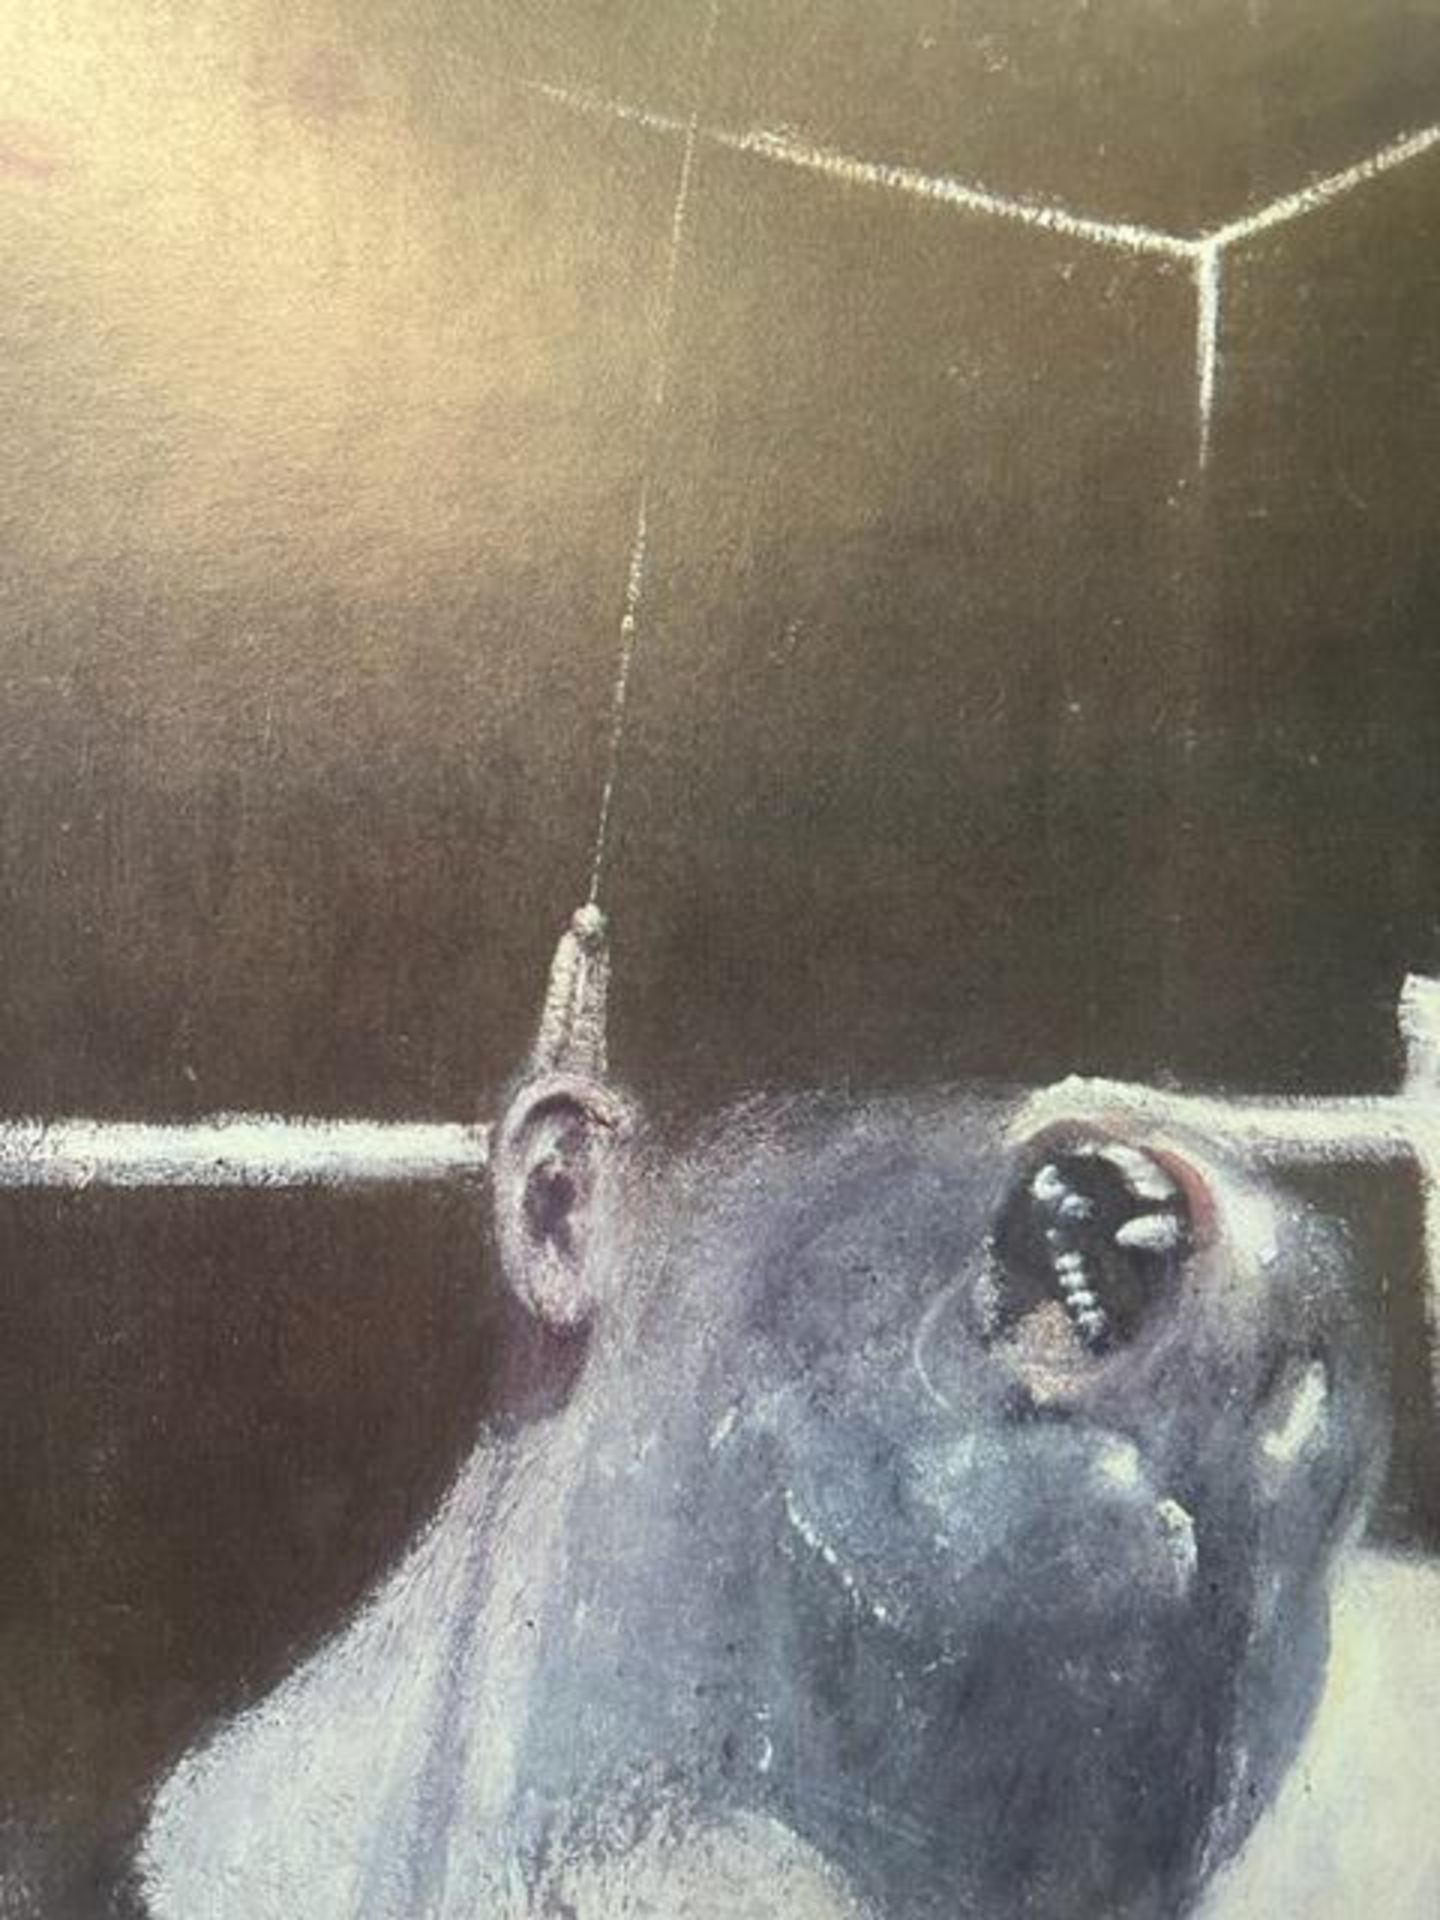 Francis Bacon "Untitled" Print. - Image 3 of 6